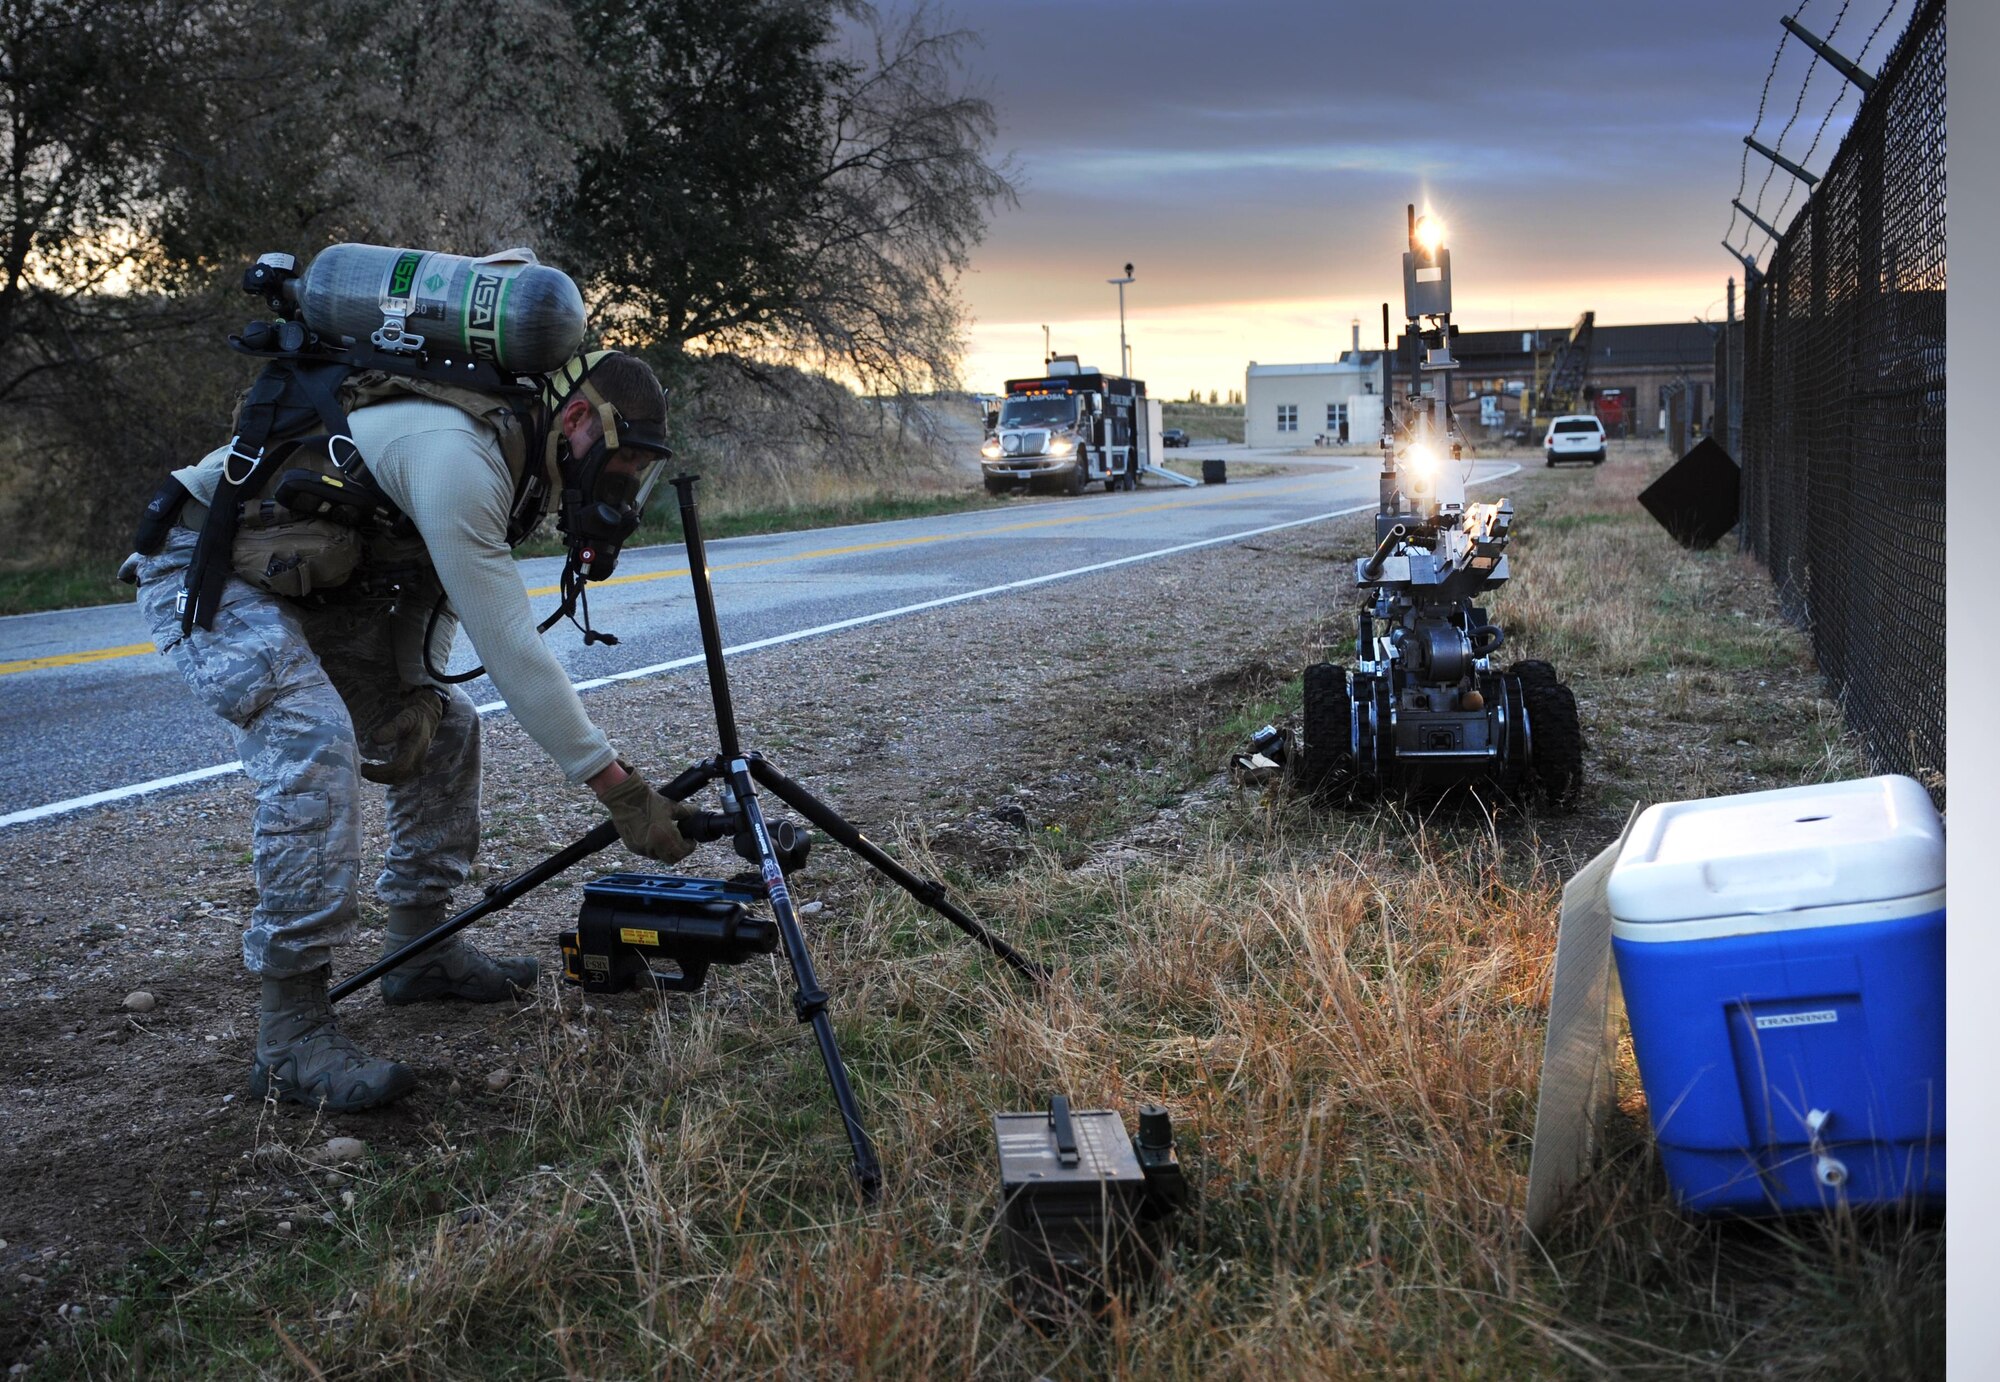 With the aid of lights and cameras on a remote-controlled robot, Senior Airman Garret Corbett, an explosive ordnance disposal technician with the 775th EOD Flight at Hill Air Force Base, sets up a mobile to examine the contents of a cooler during a training scenario on investigating suspicious packages. Once Corbett takes the X-ray, he can process them in a mobile computer lab in the command truck. (U.S. Air Force photo/Micah Garbarino)